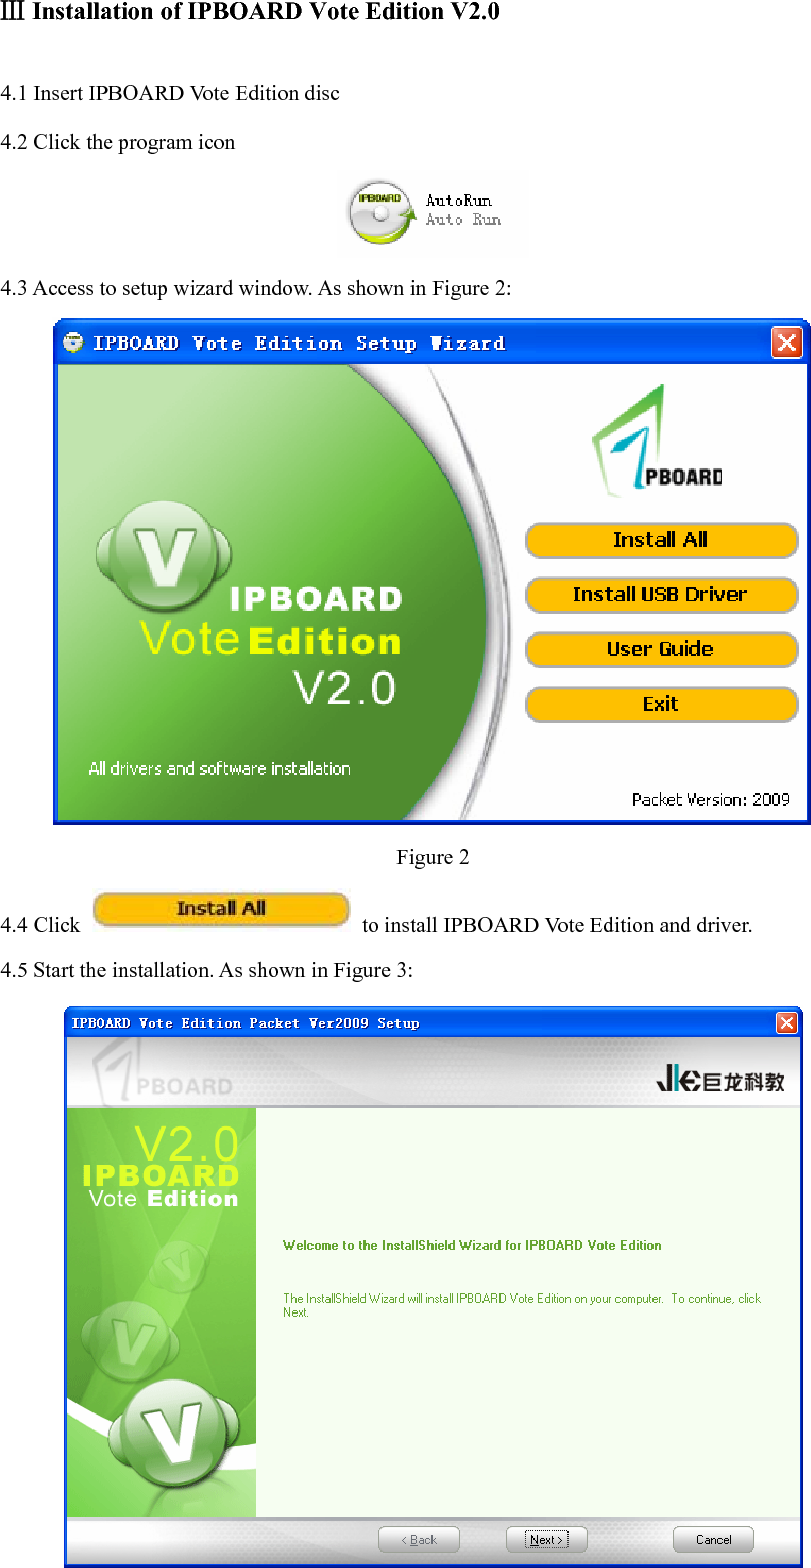 Ⅲ Installation of IPBOARD Vote Edition V2.0 4.1 Insert IPBOARD Vote Edition disc 4.2 Click the program icon  4.3 Access to setup wizard window. As shown in Figure 2:  Figure 2 4.4 Click    to install IPBOARD Vote Edition and driver. 4.5 Start the installation. As shown in Figure 3:  